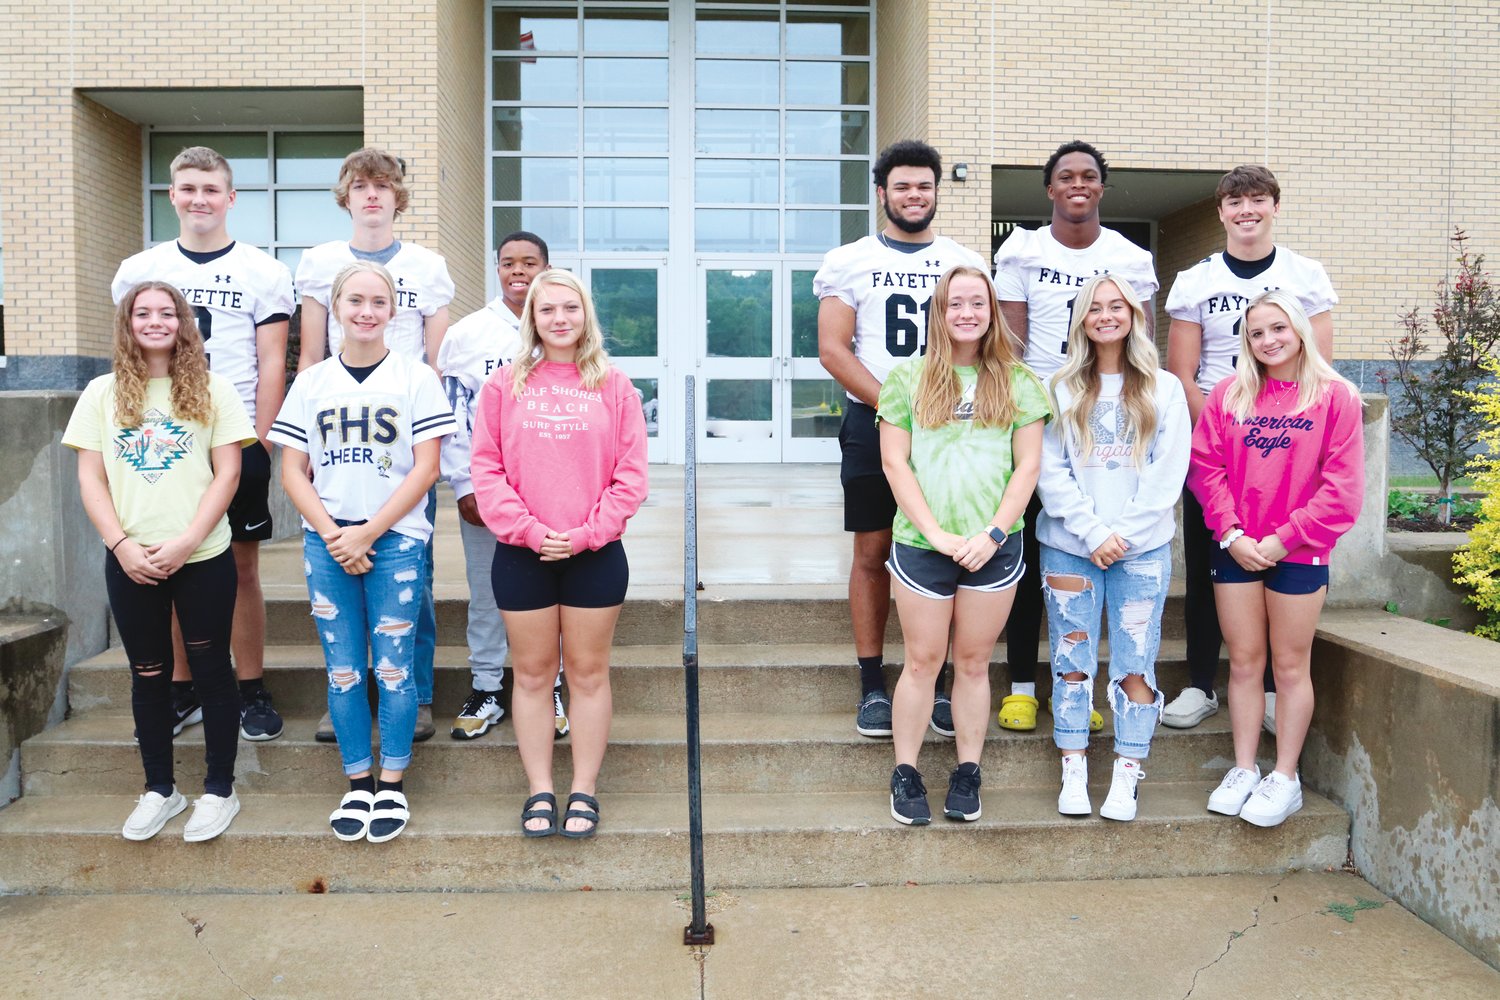 THE 2022 FAYETTE HIGH SCHOOL HOMECOMING COURT. Left: Freshman attendants Carter Vroman and Mariah Felten, sophomore attendants Camden Kindle and Cayle John, and junior attendants Kristian Pulliam and Jenny Kunze. Right: Senior King and Queen Attendants Haden Kelly and Megan Lewis, Chase Allen-Jackman and Madi Lawson, and Ben Wells and Preslee Sunderland.